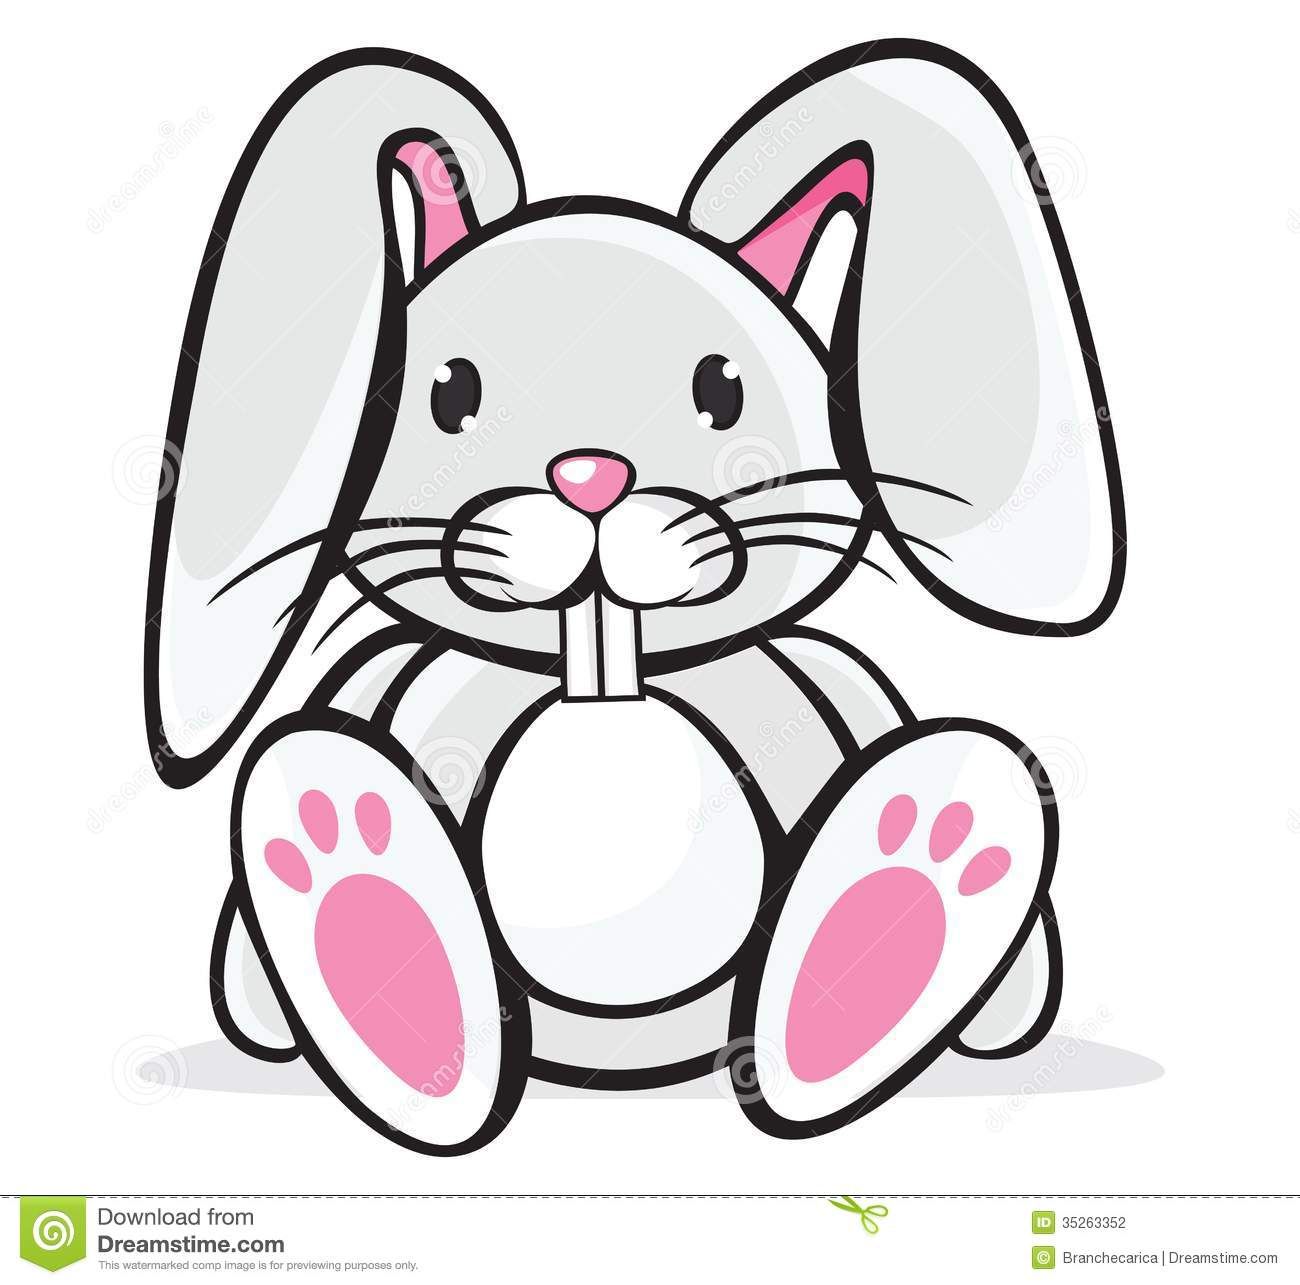 Go images for cute. Back clipart bunny